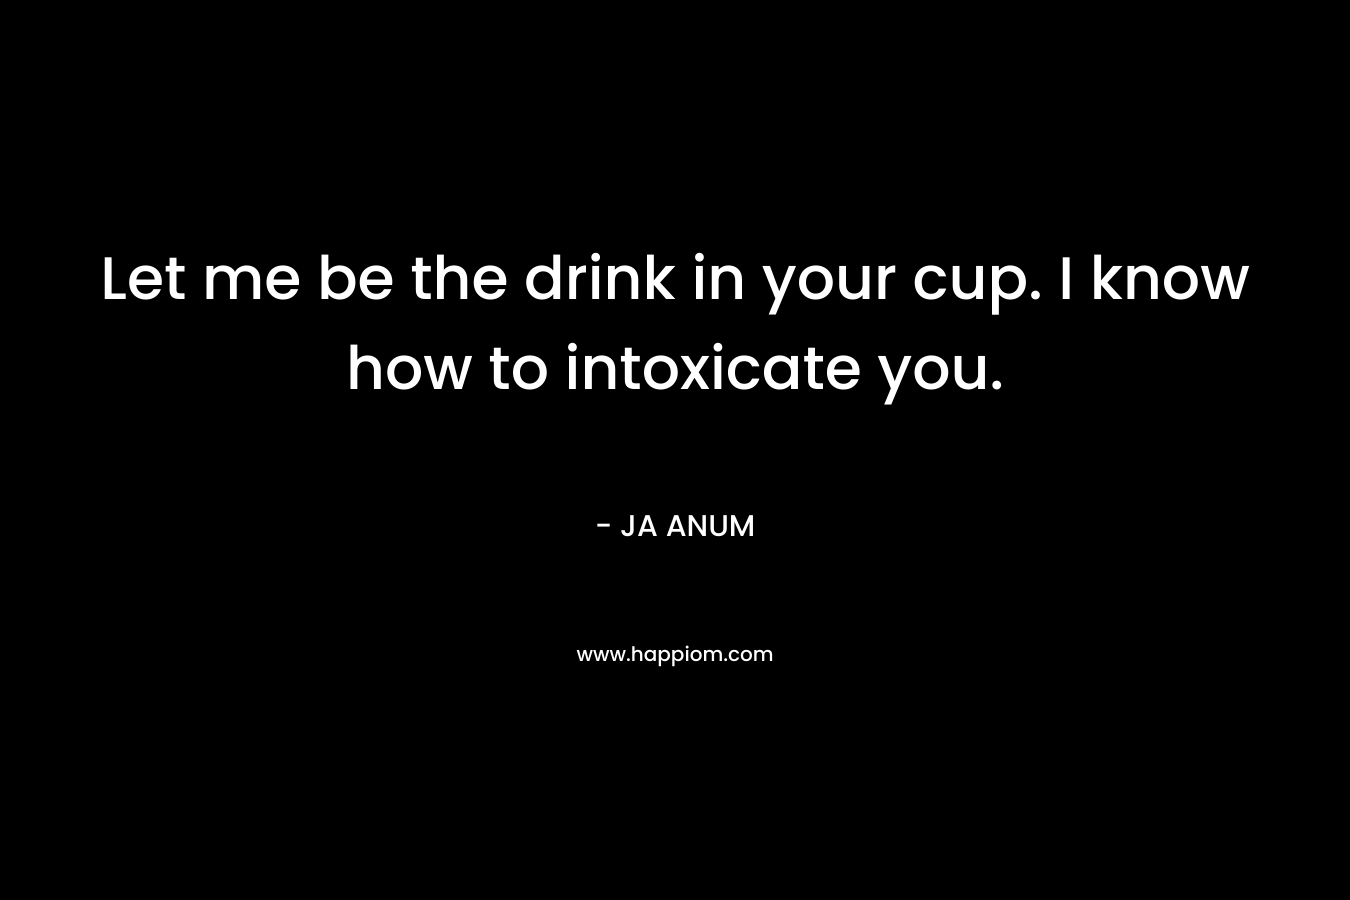 Let me be the drink in your cup. I know how to intoxicate you. – JA ANUM